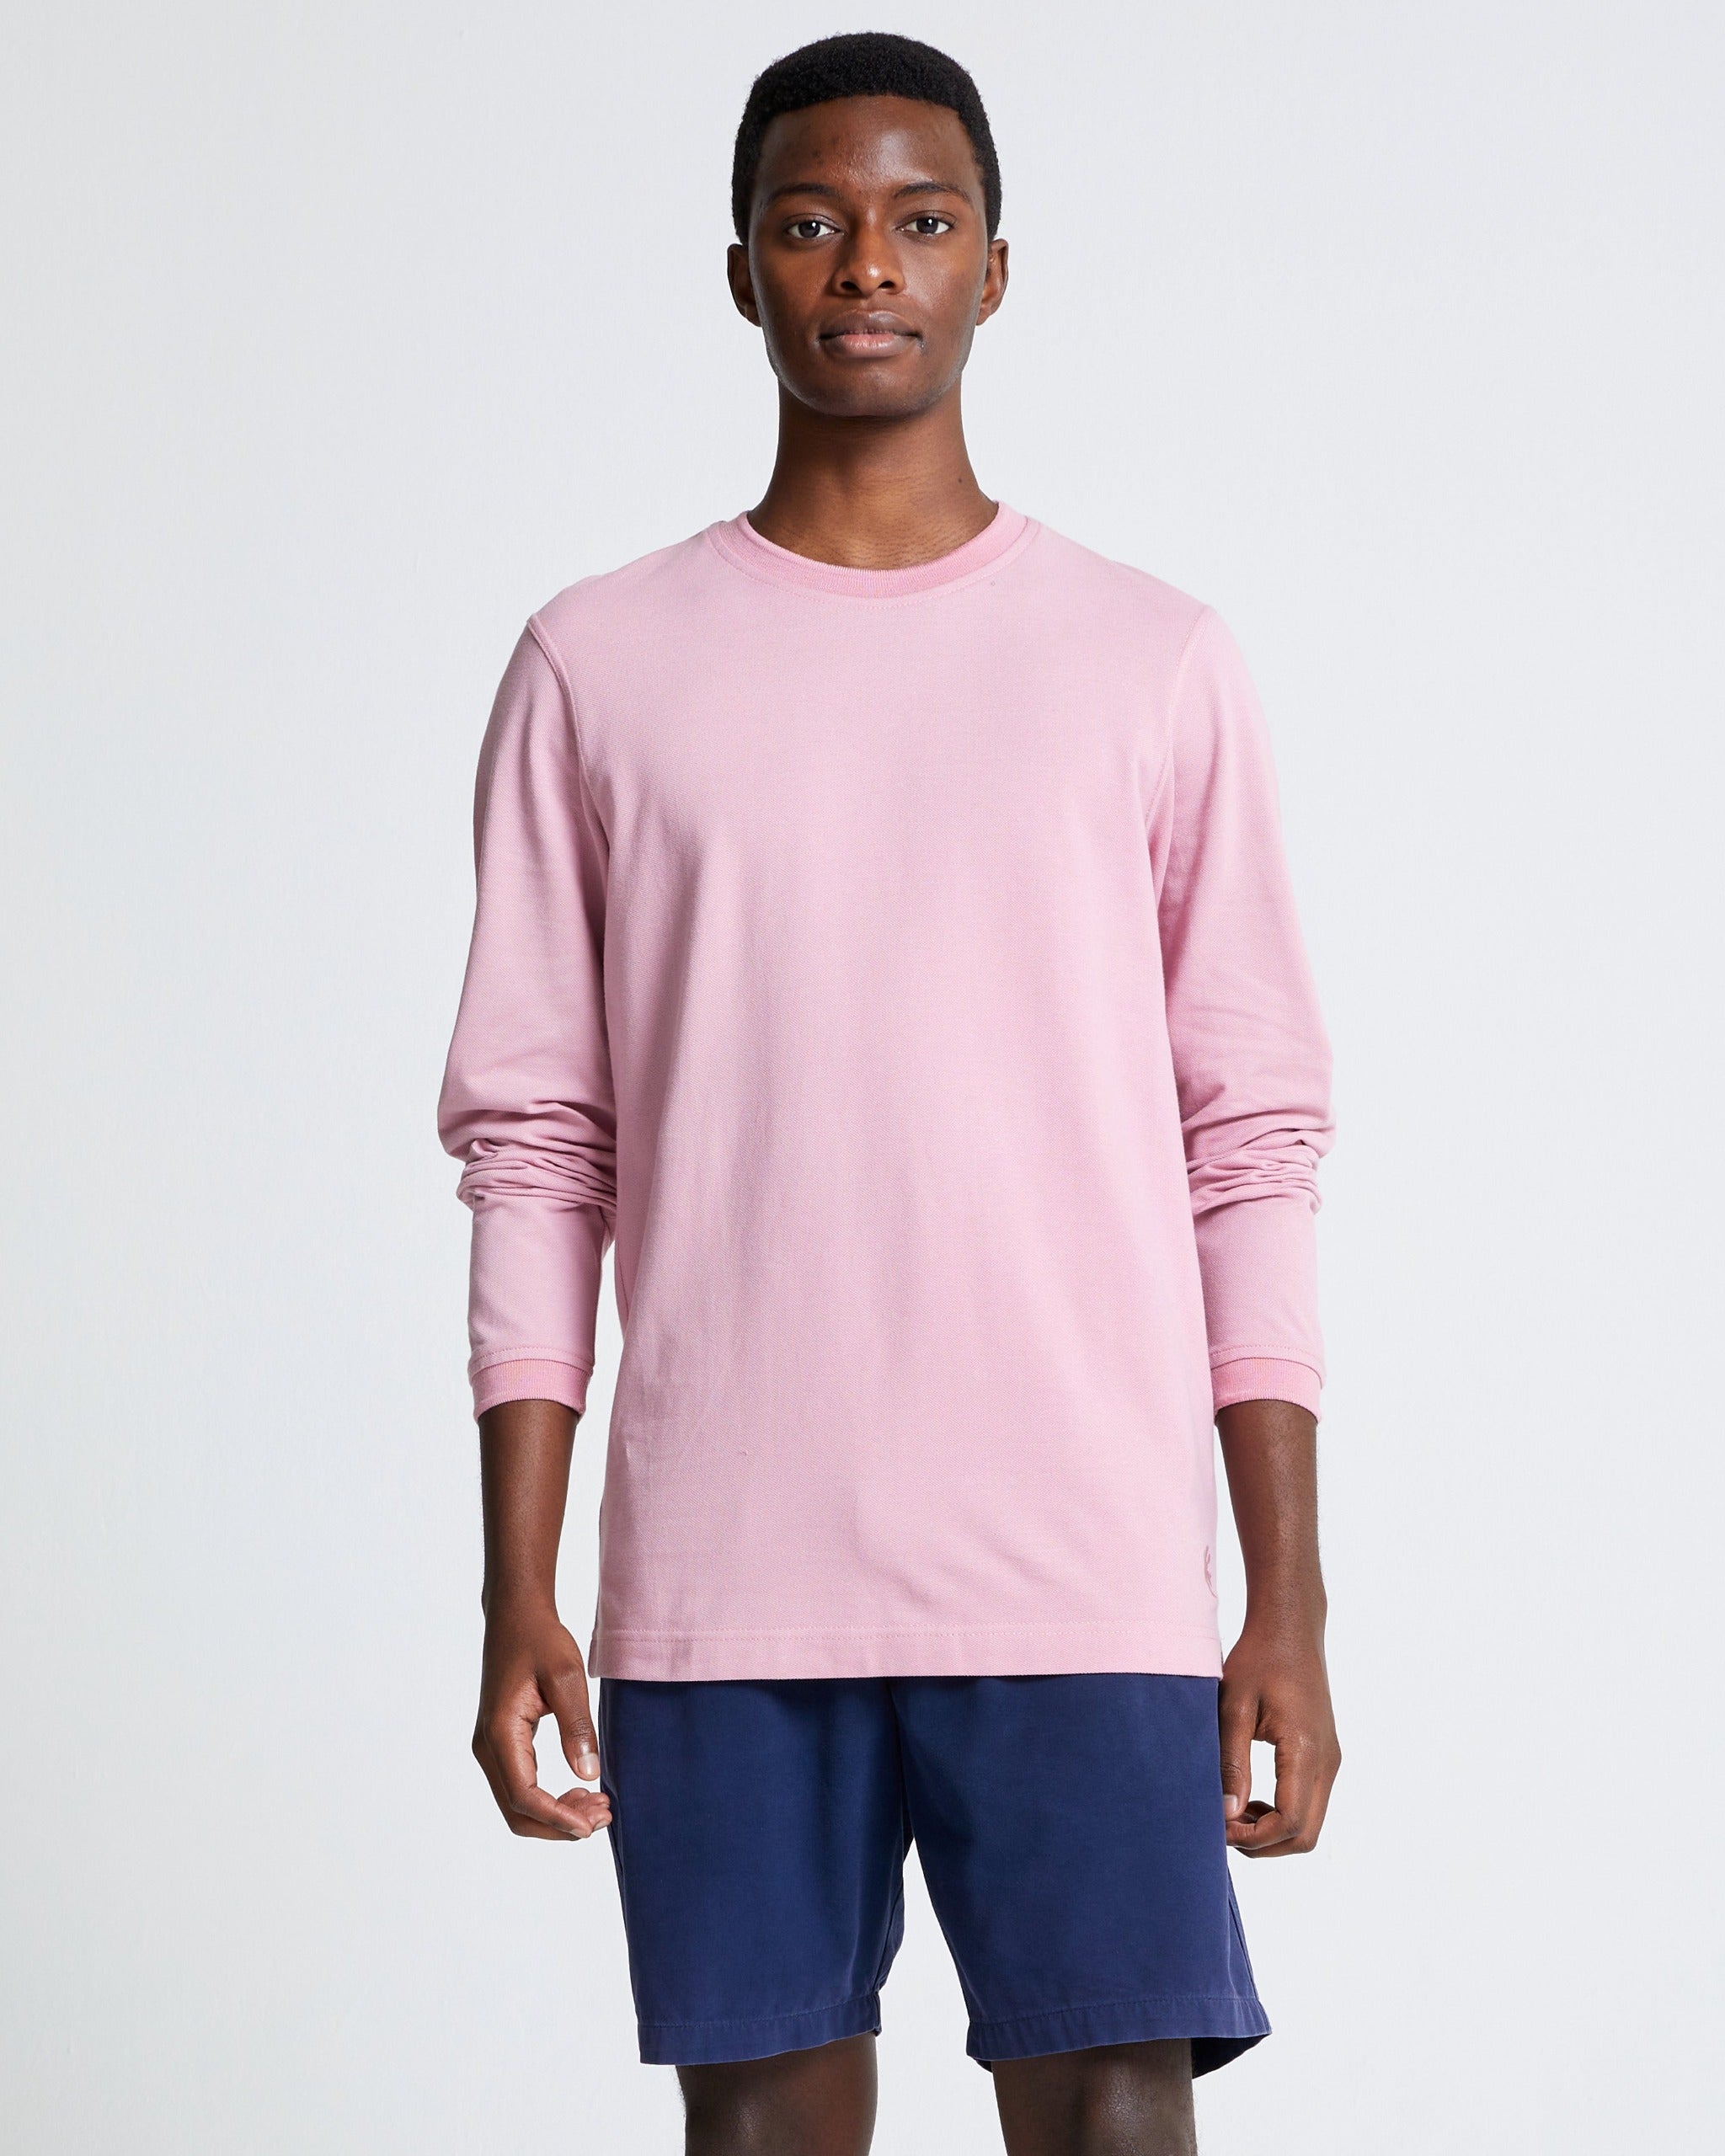 Long Sleeve Pique Tee in Cotton shade Dusty Pink